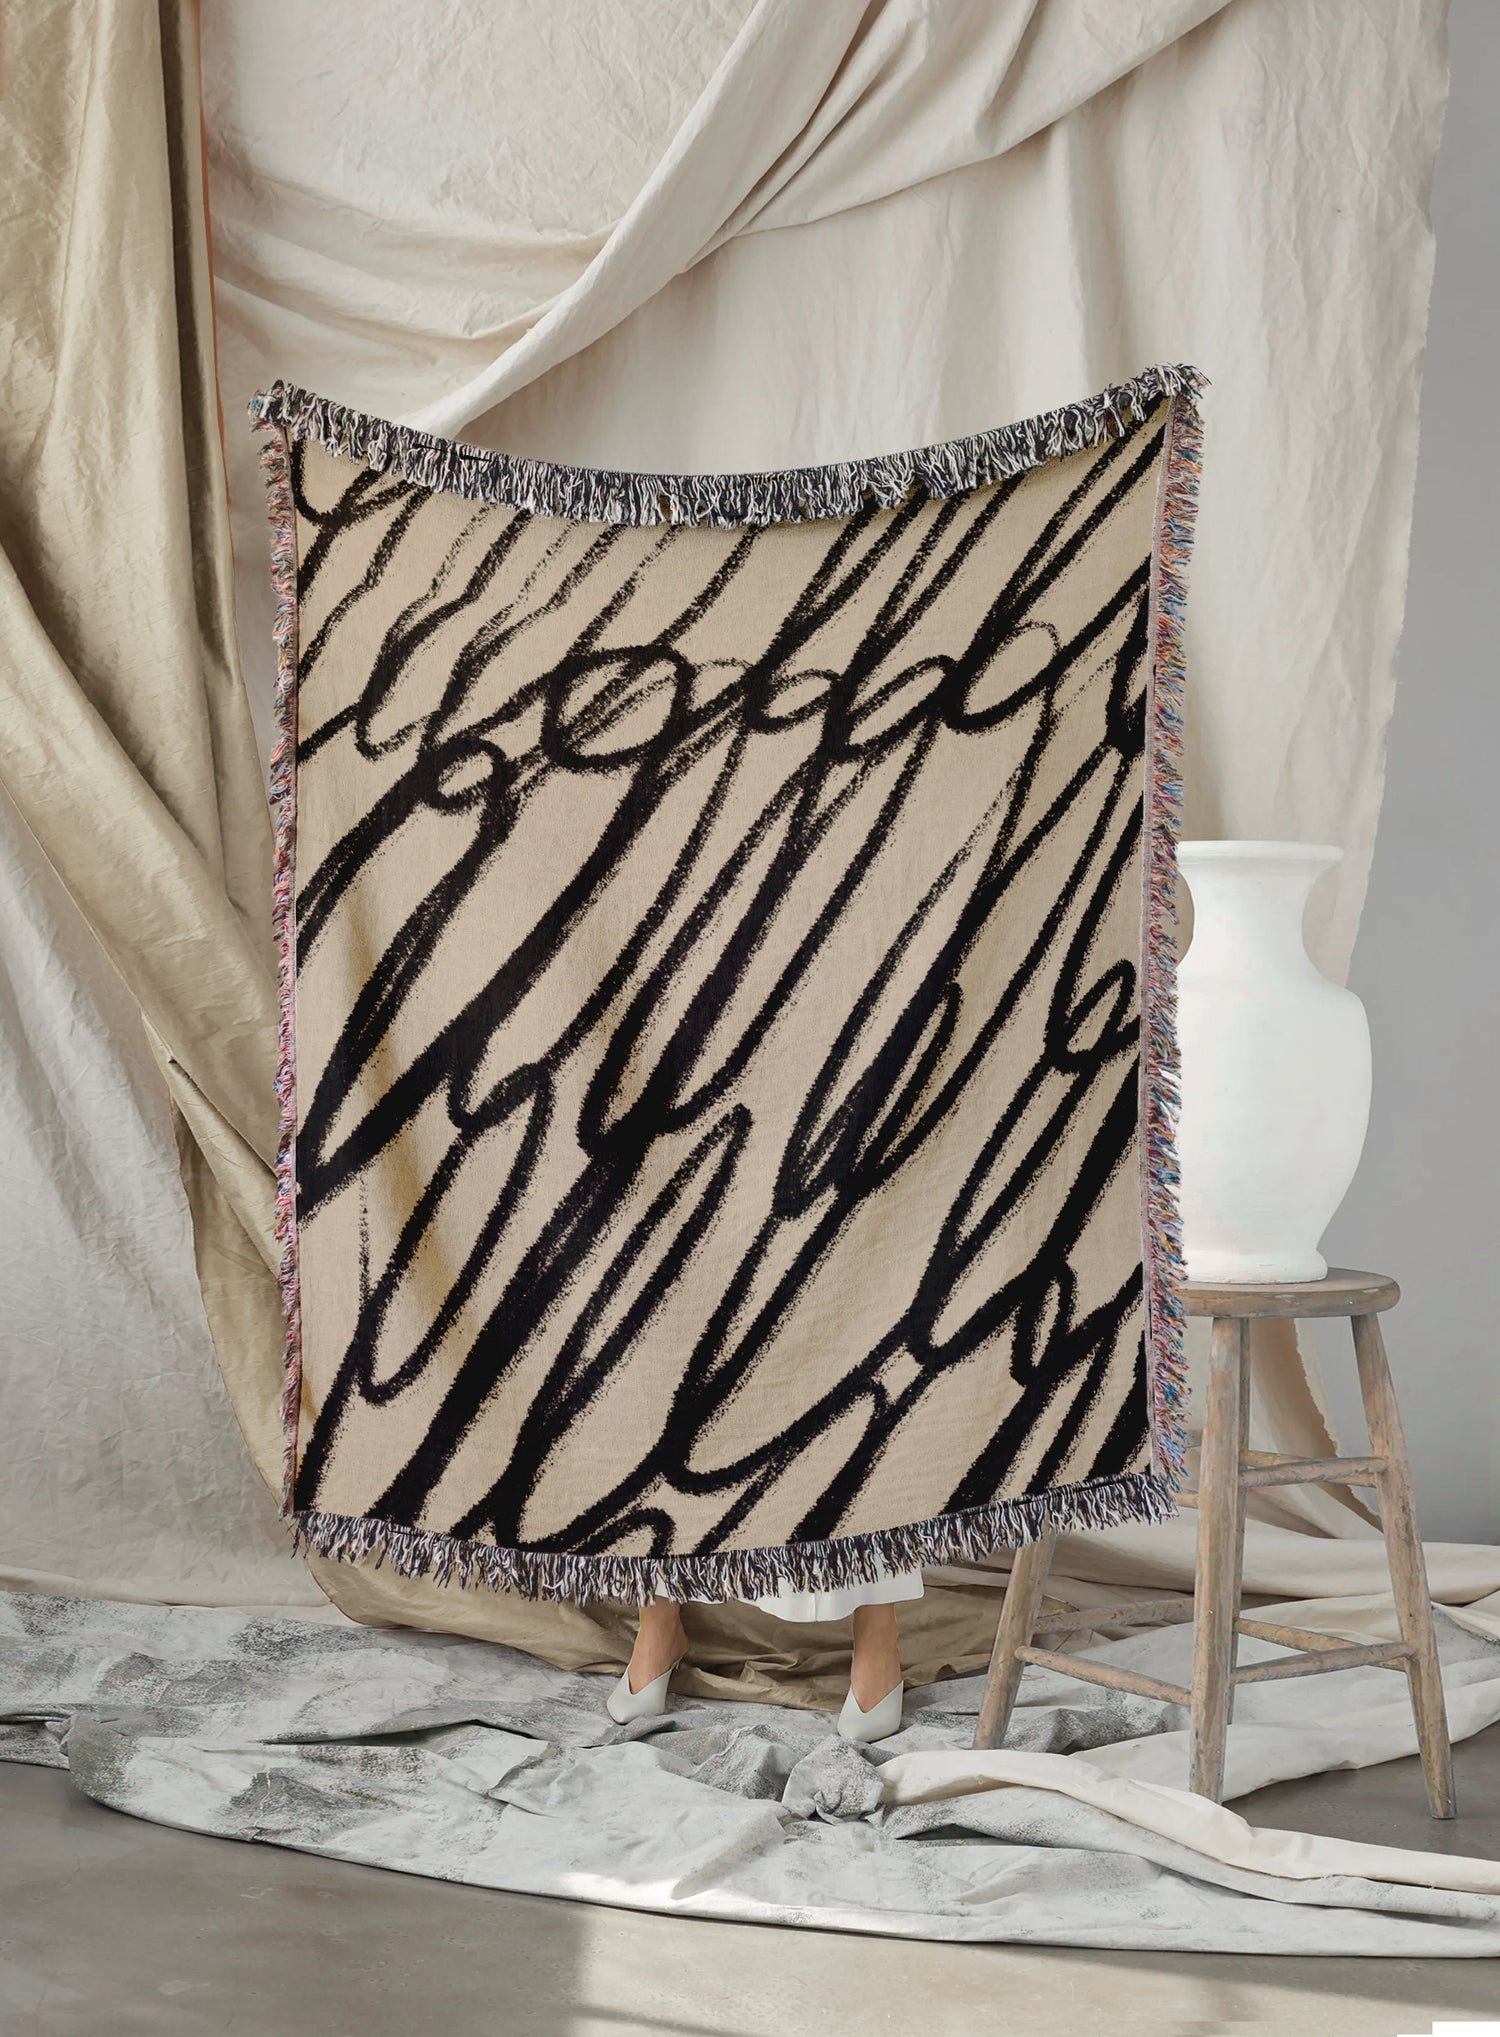 Woven throw, cotton plaid, decor, blanket, living room home decor, beige, black, abstract